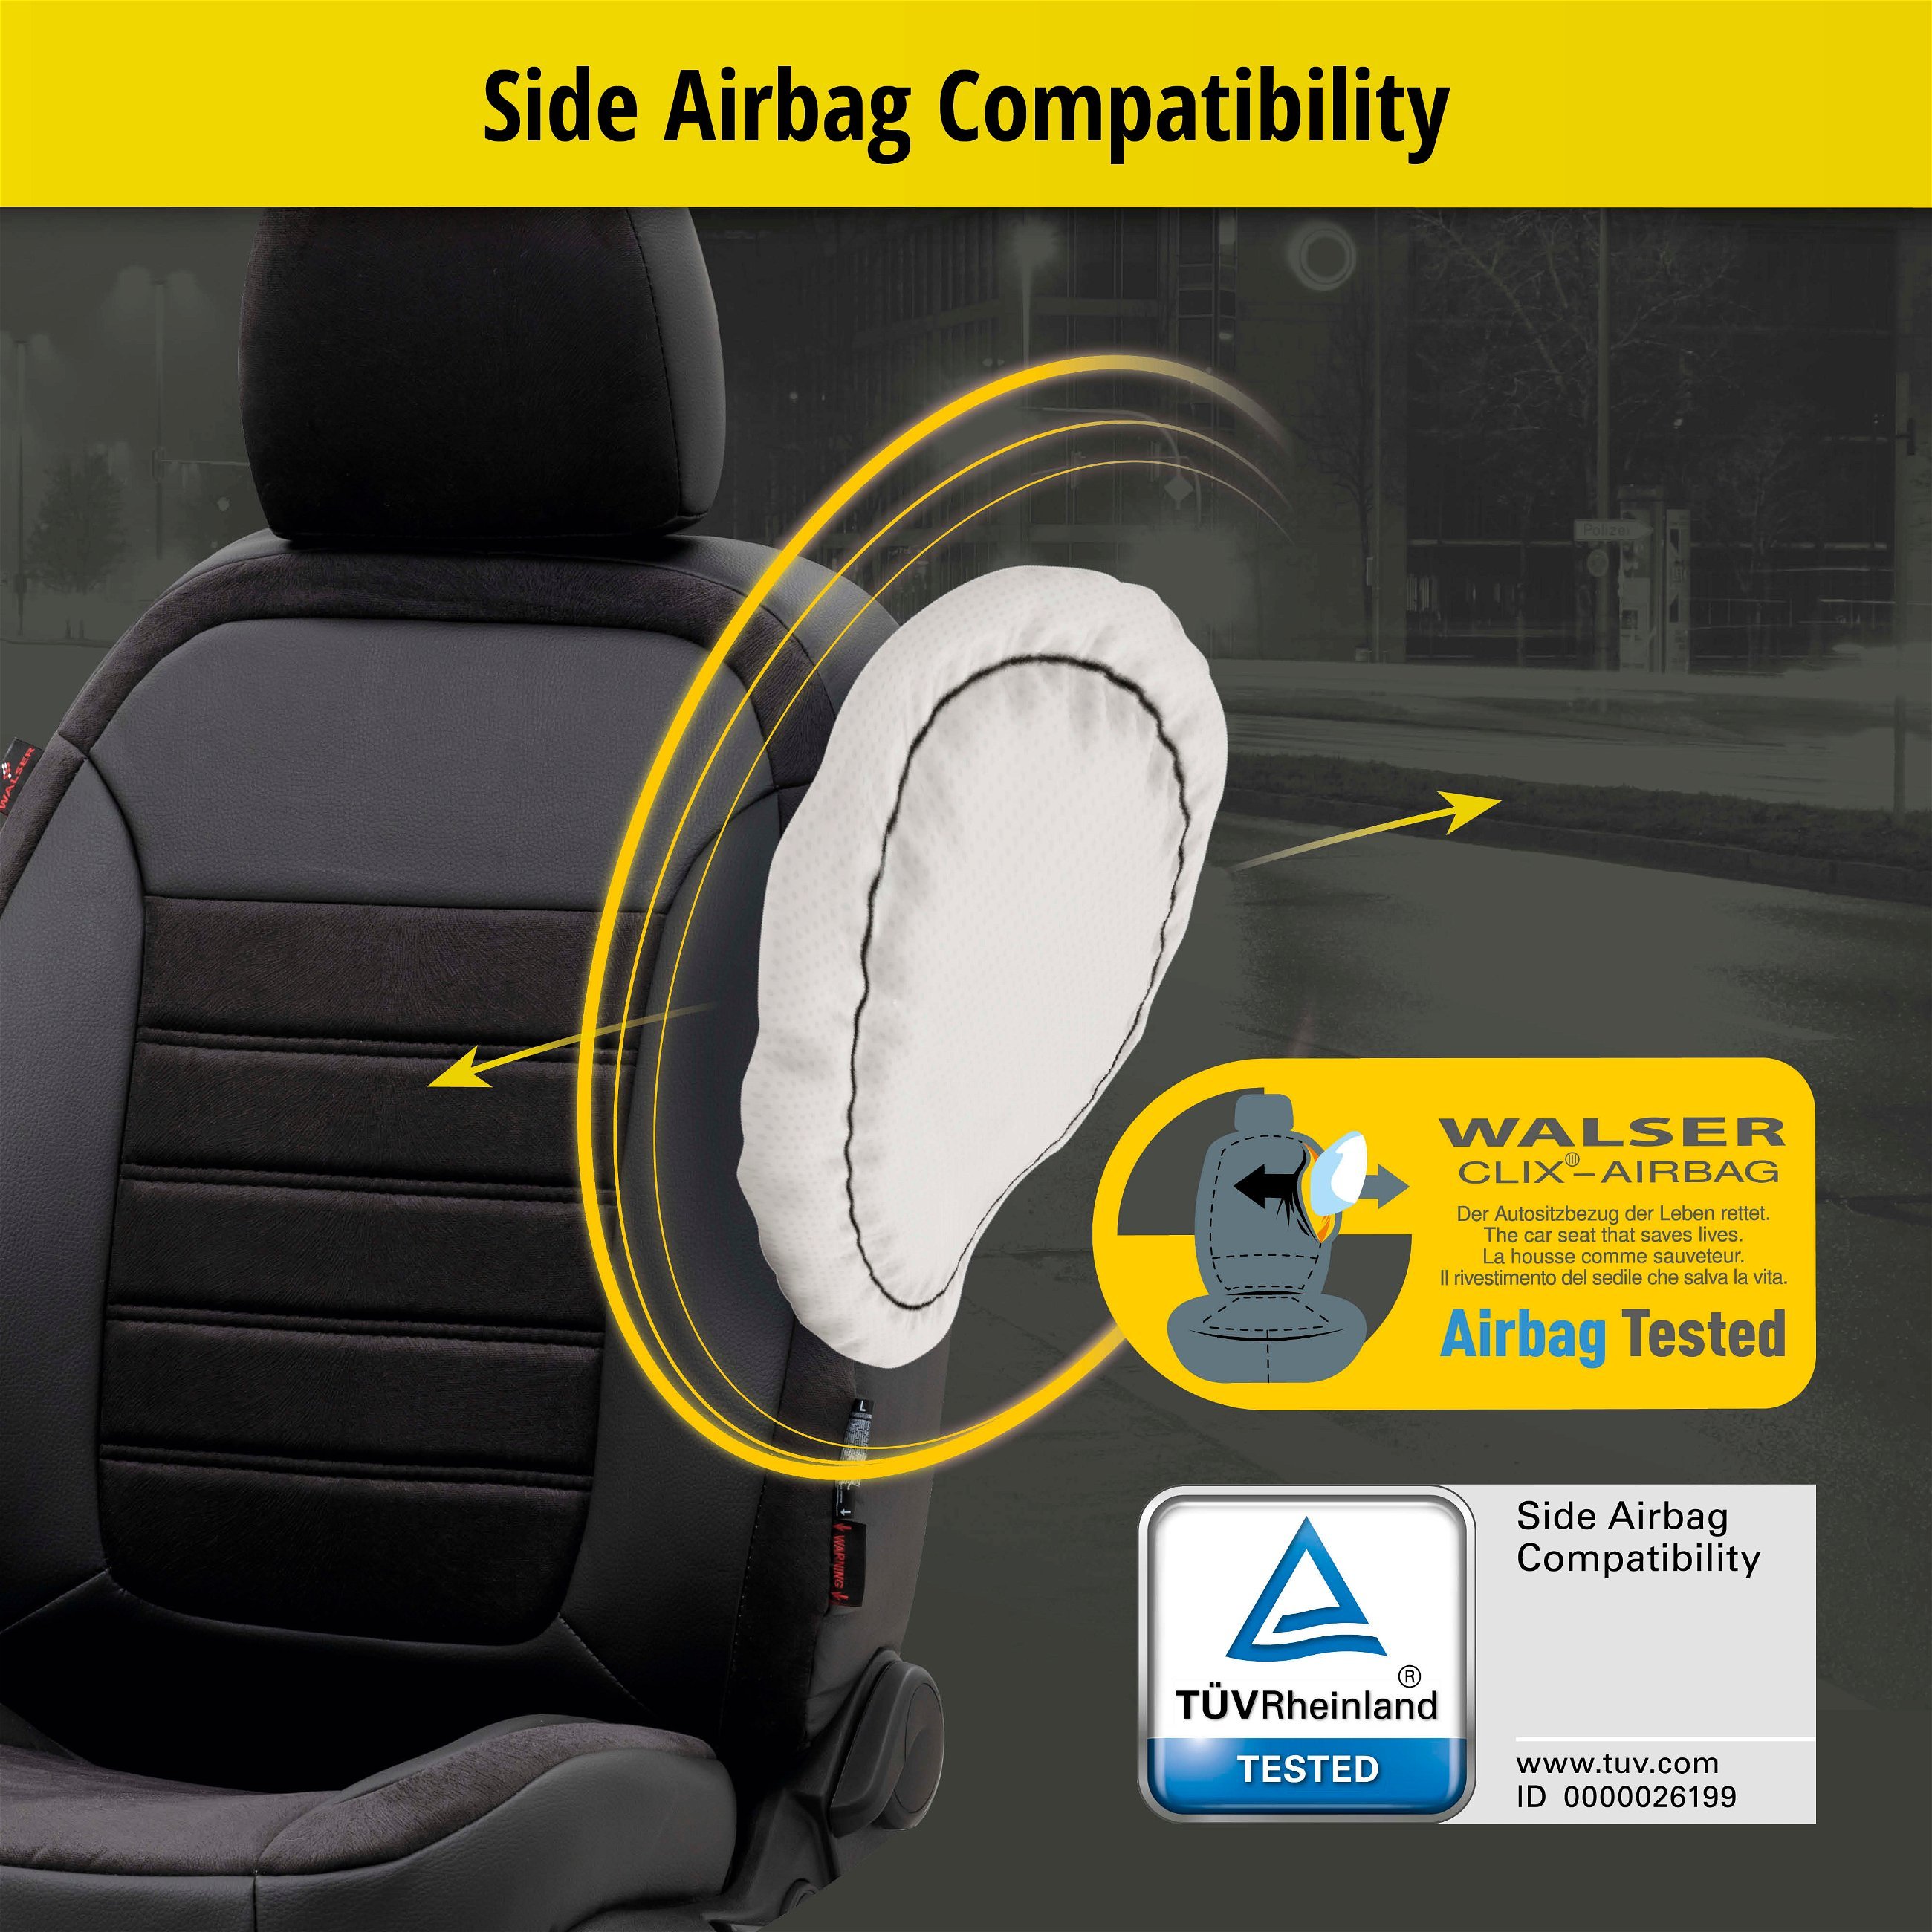 Seat Cover Bari for Toyota Auris (E15) 10/2006-09/2012, 2 seat covers for normal seats